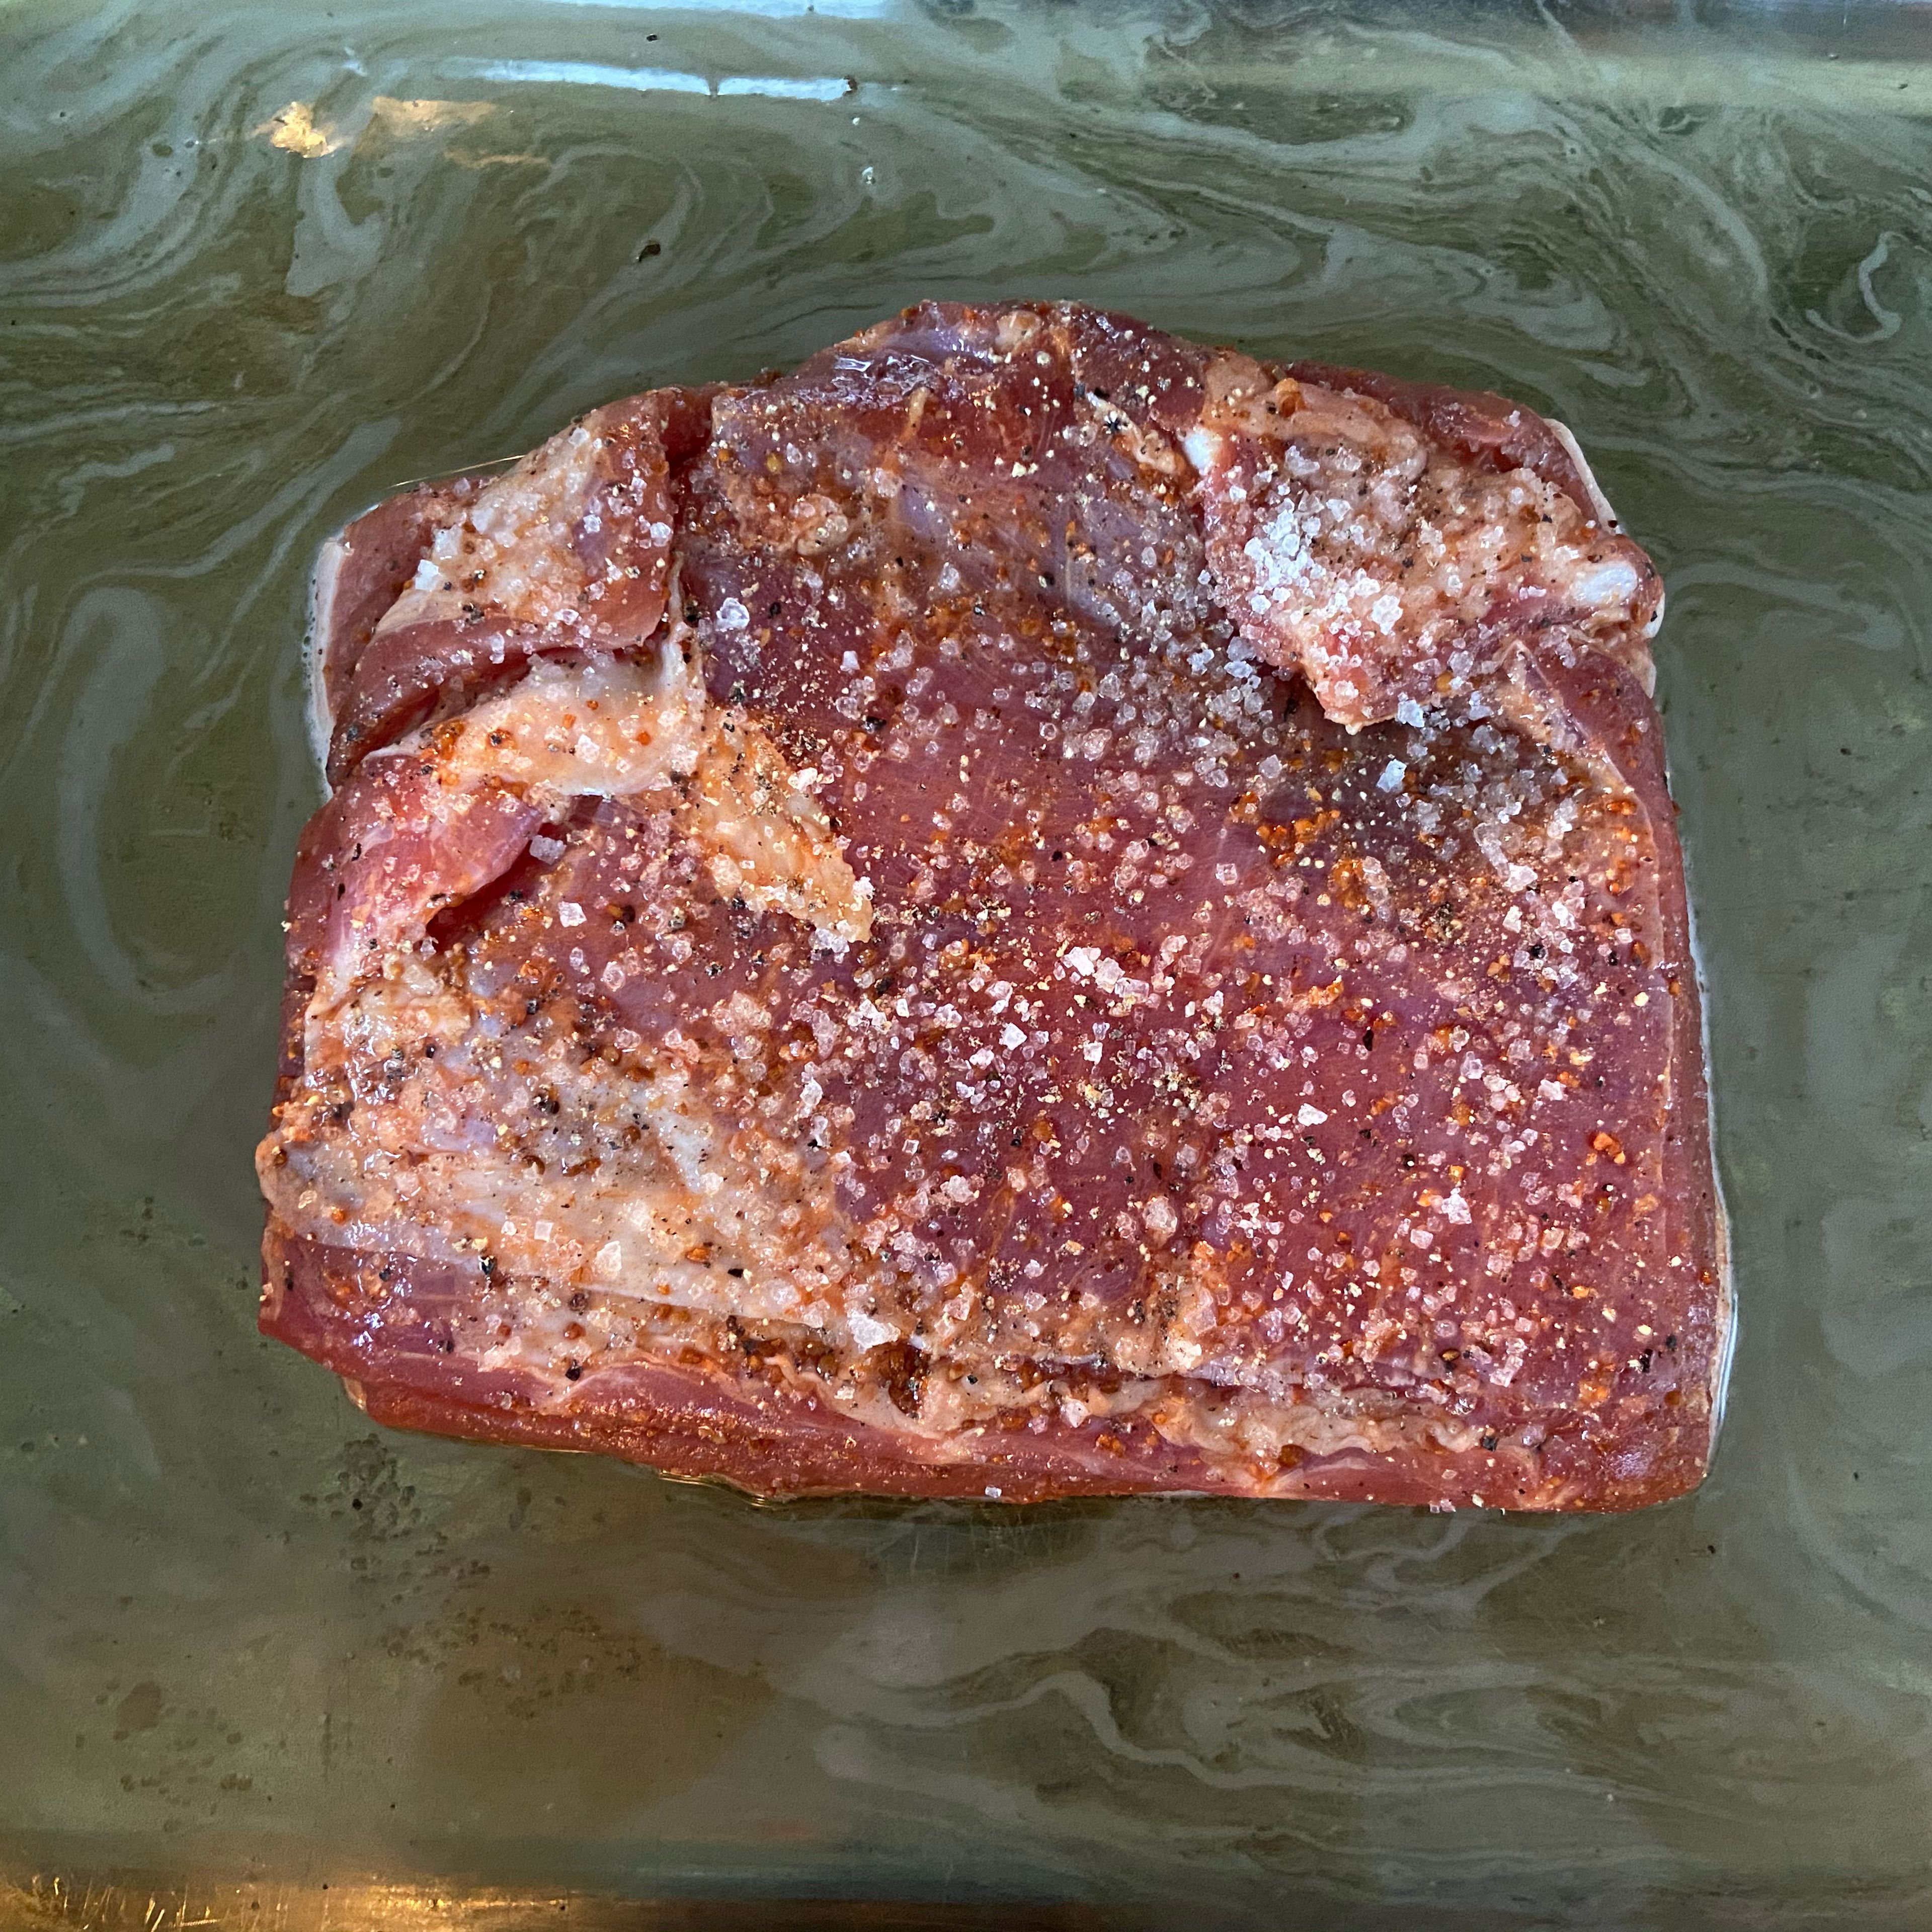 Season the meat, except for the rind. (Salt, pepper, mustard seeds) Place the belly, with the rind facing downwards, in a roasting pan filled, add beer and transfer into the oven for approx. 30 min. at 180°C/360°F top/bottom.